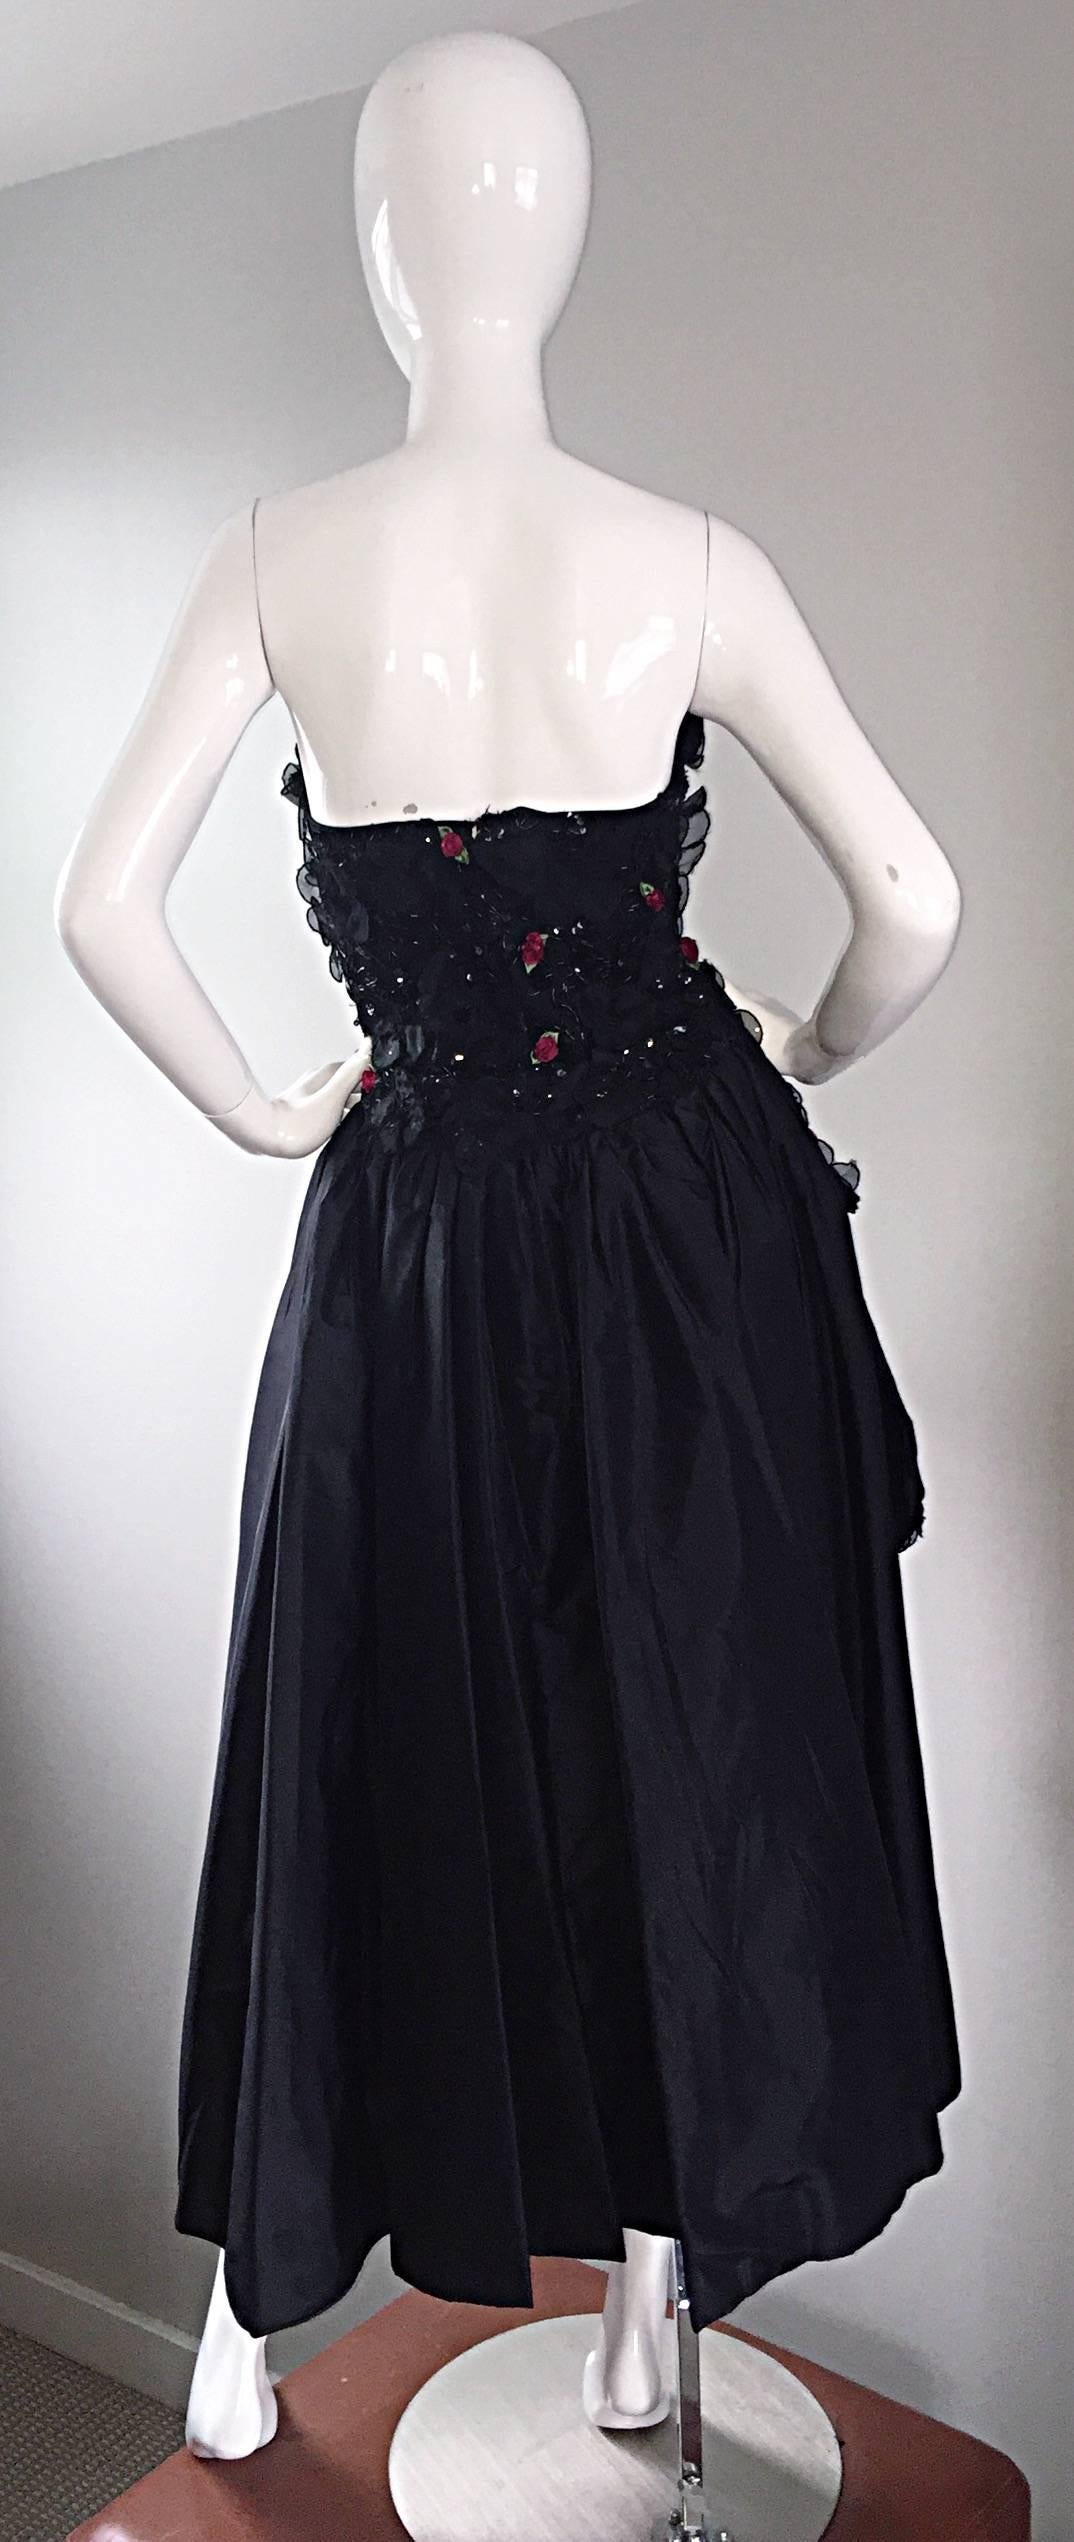 Exceptional 1950s Vintage Black Silk Taffeta Hi - Lo Dress w/ Rosettes and Lace For Sale 1